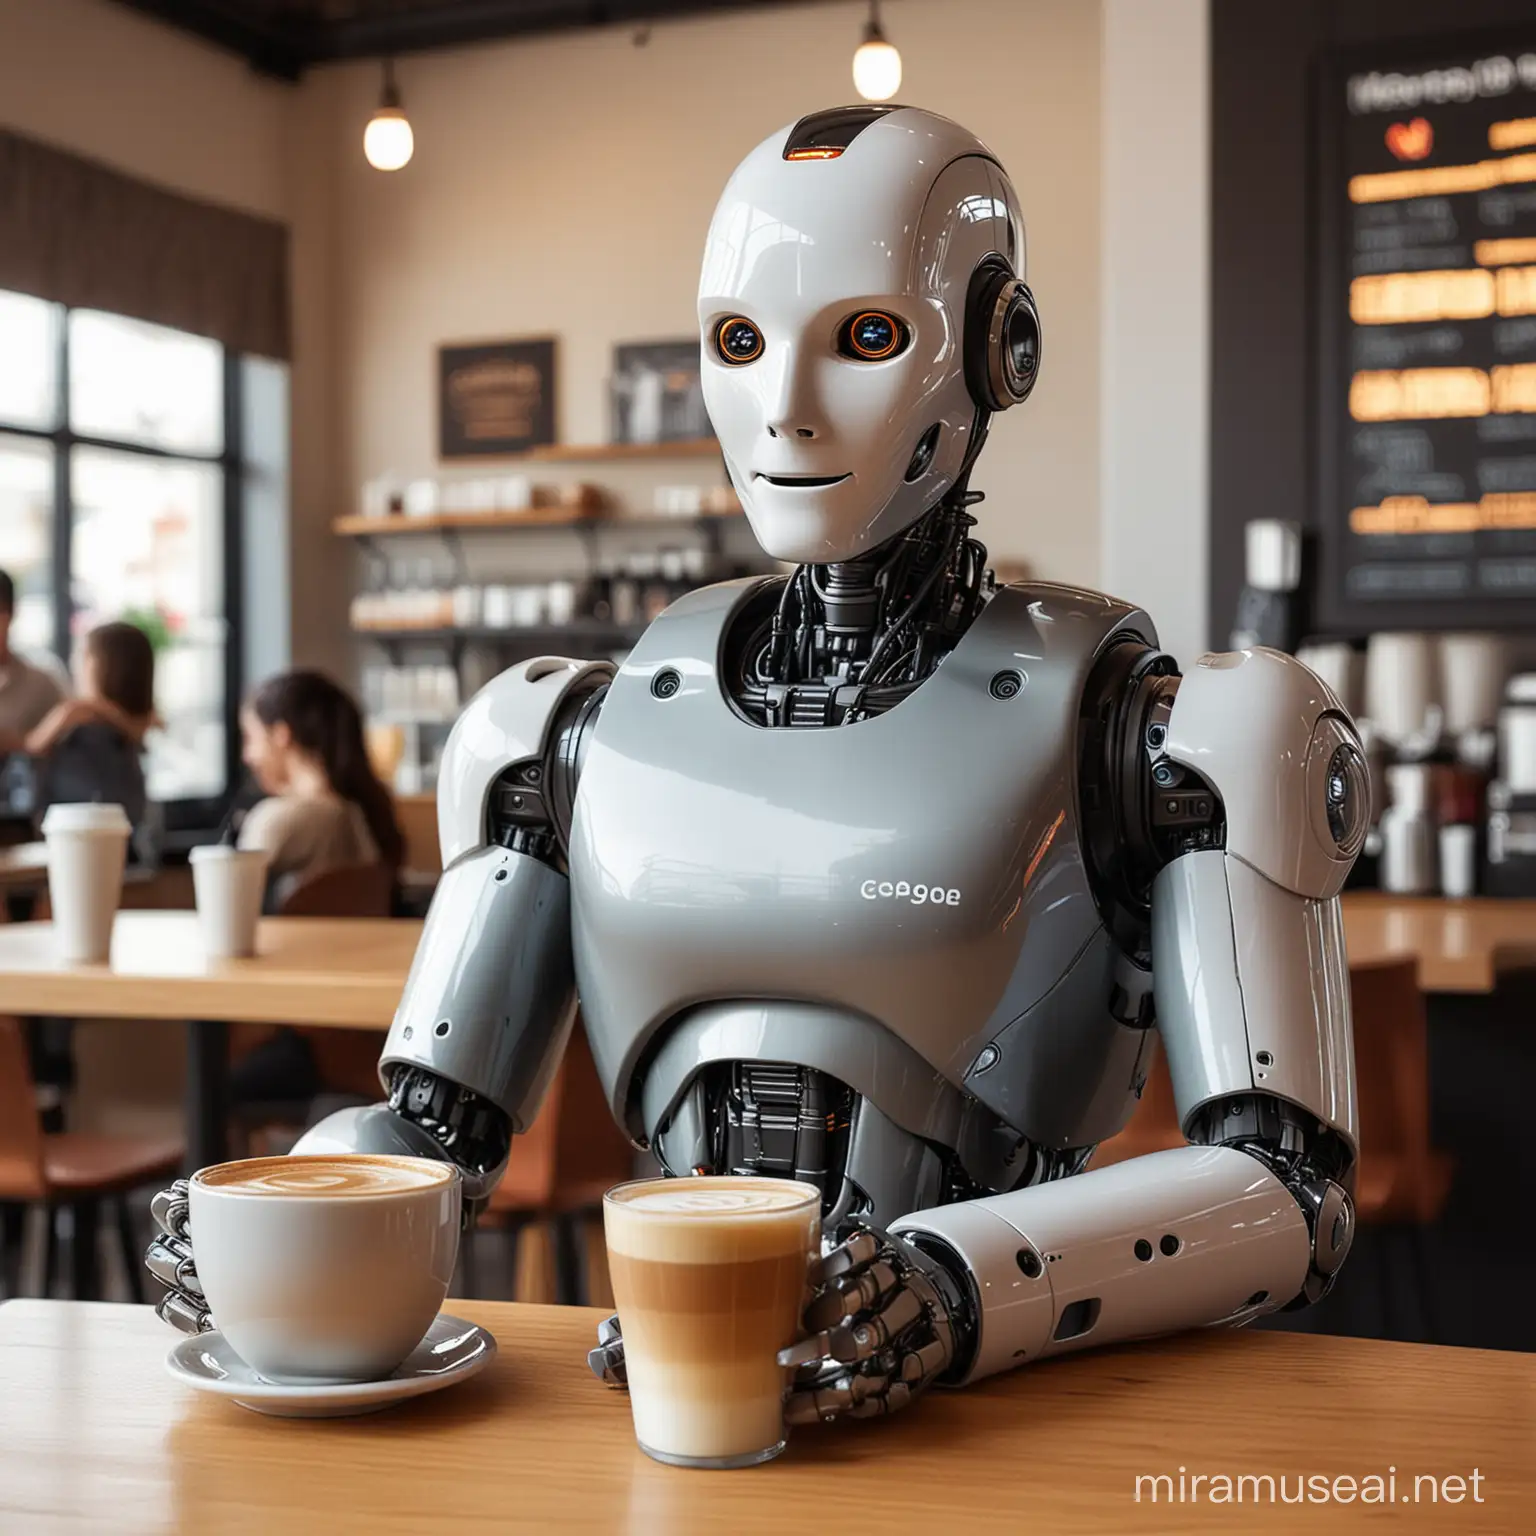 smooth robot in a coffee shop that blends coffee